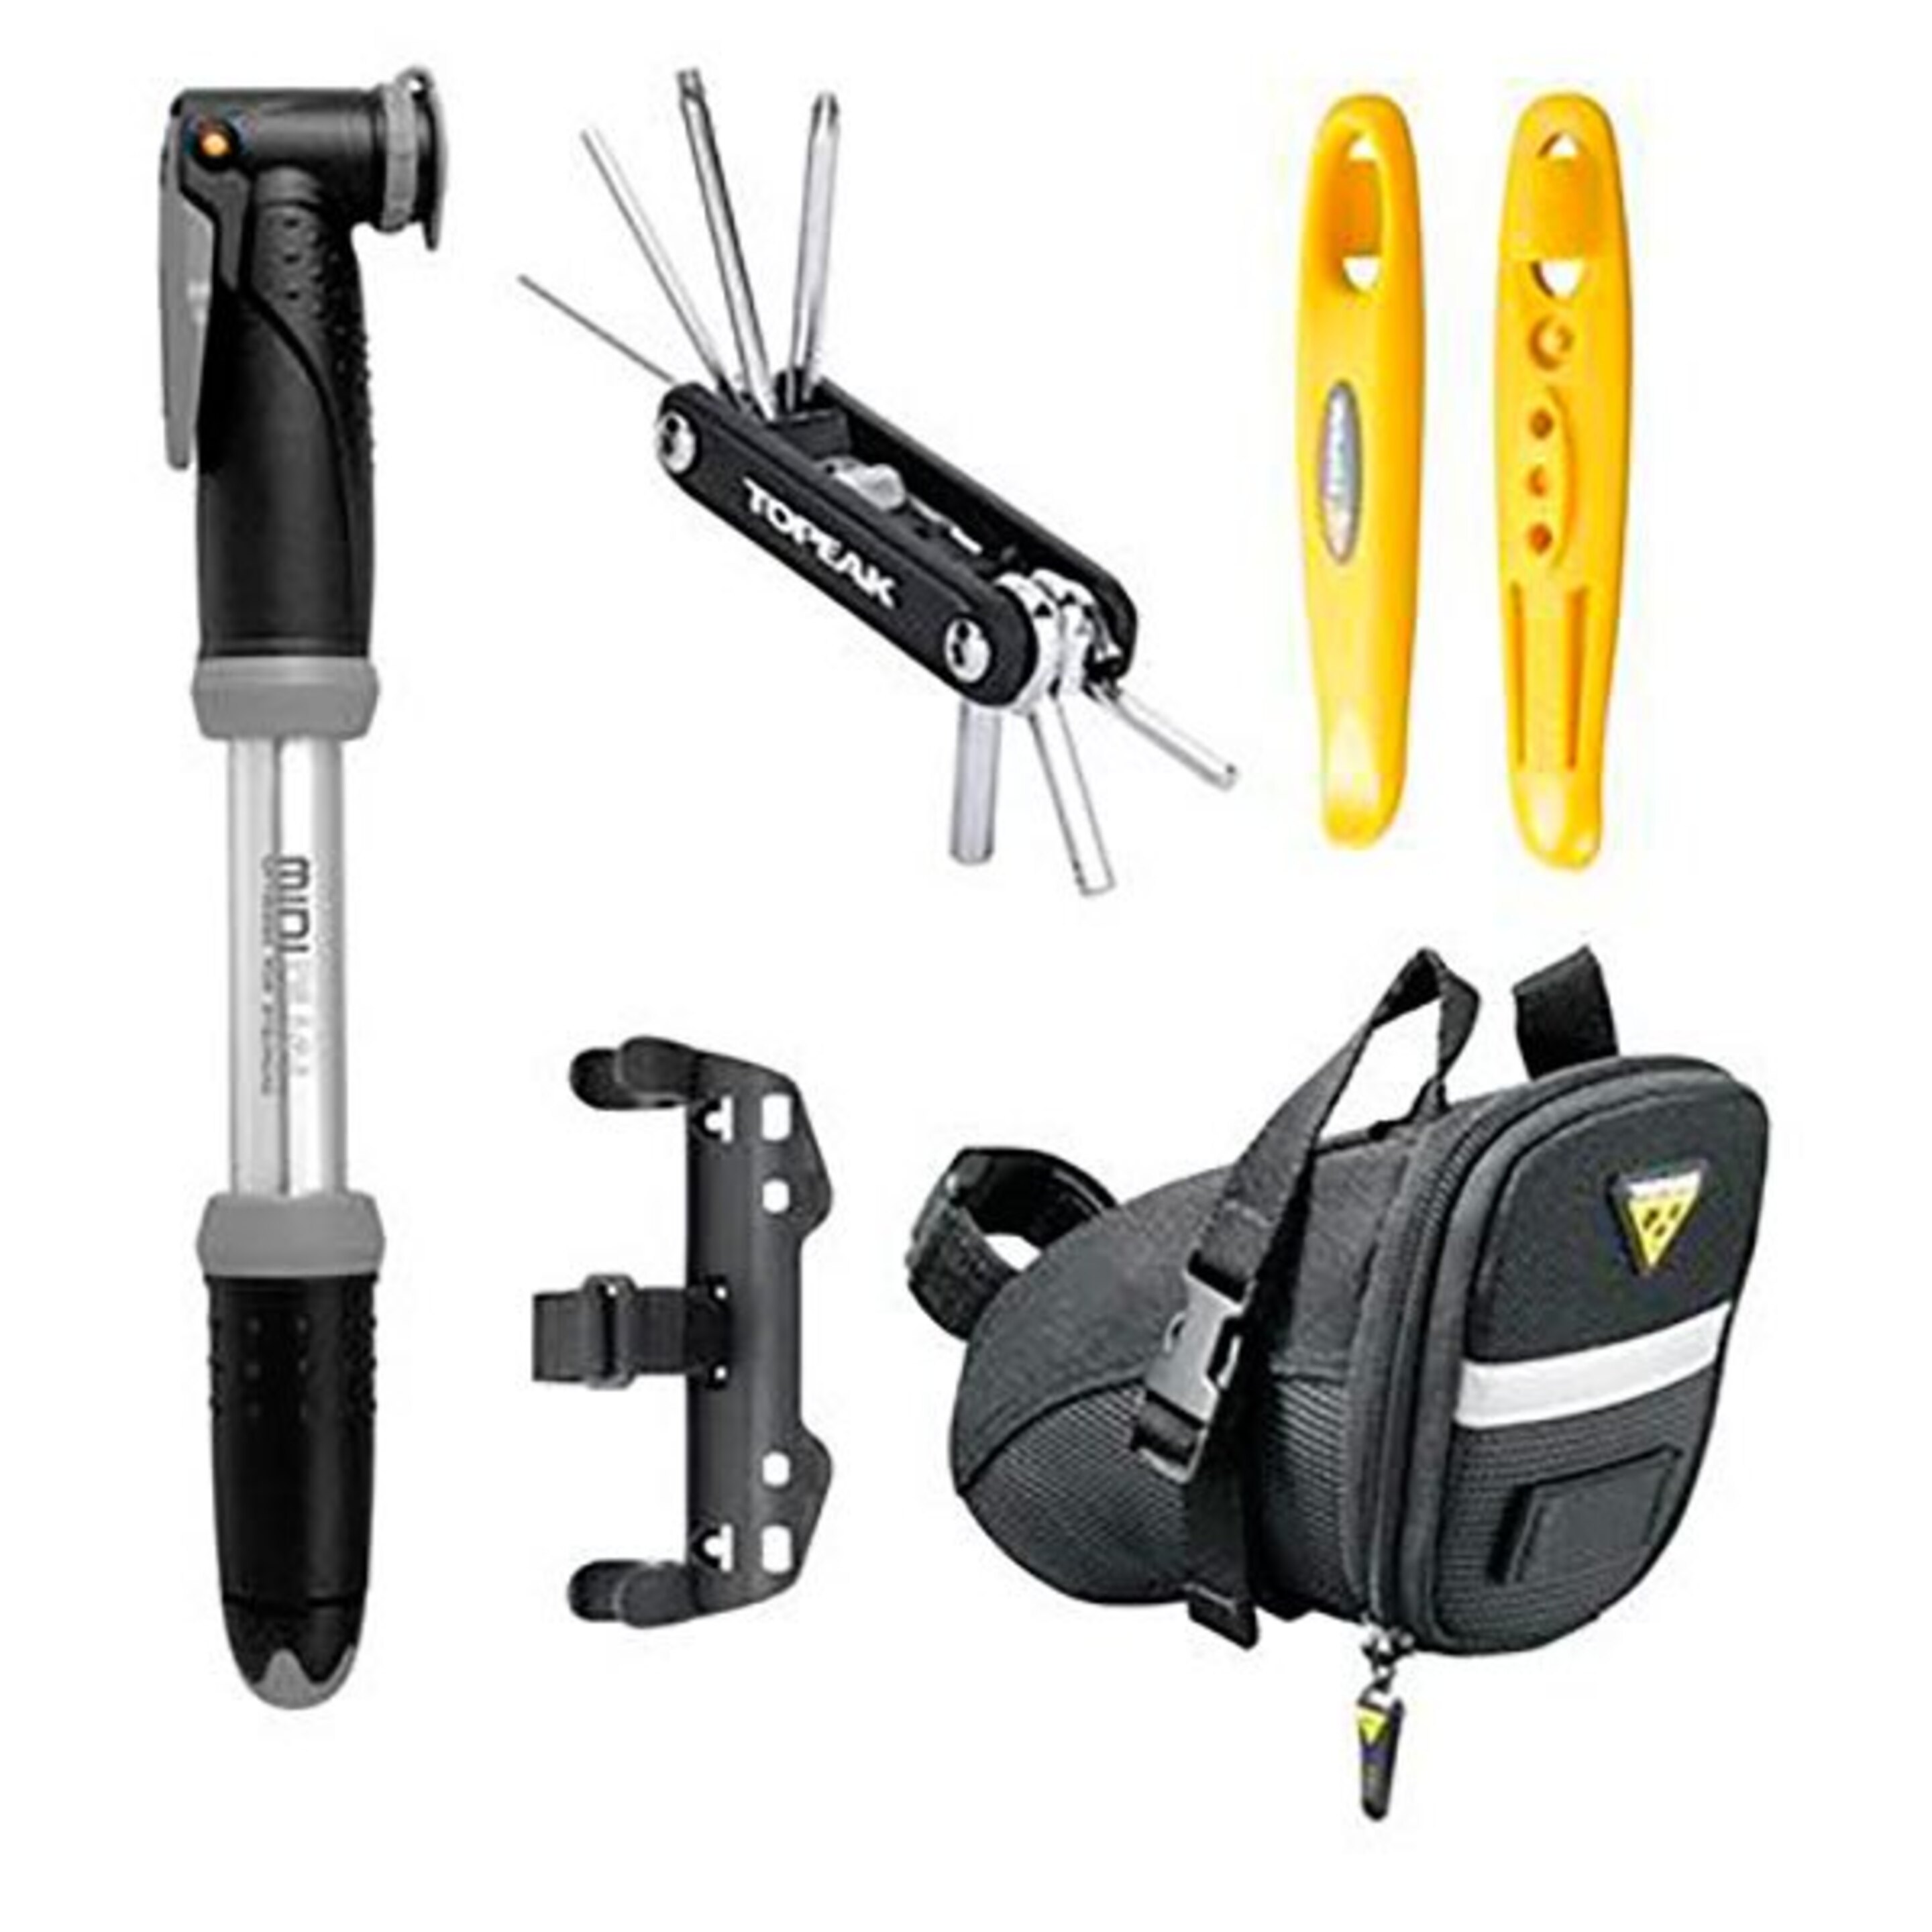 Kit Accesorios Essentials Cycling Accesory Kit - Negro - Kit Accesorios Essentials Cycling A  MKP